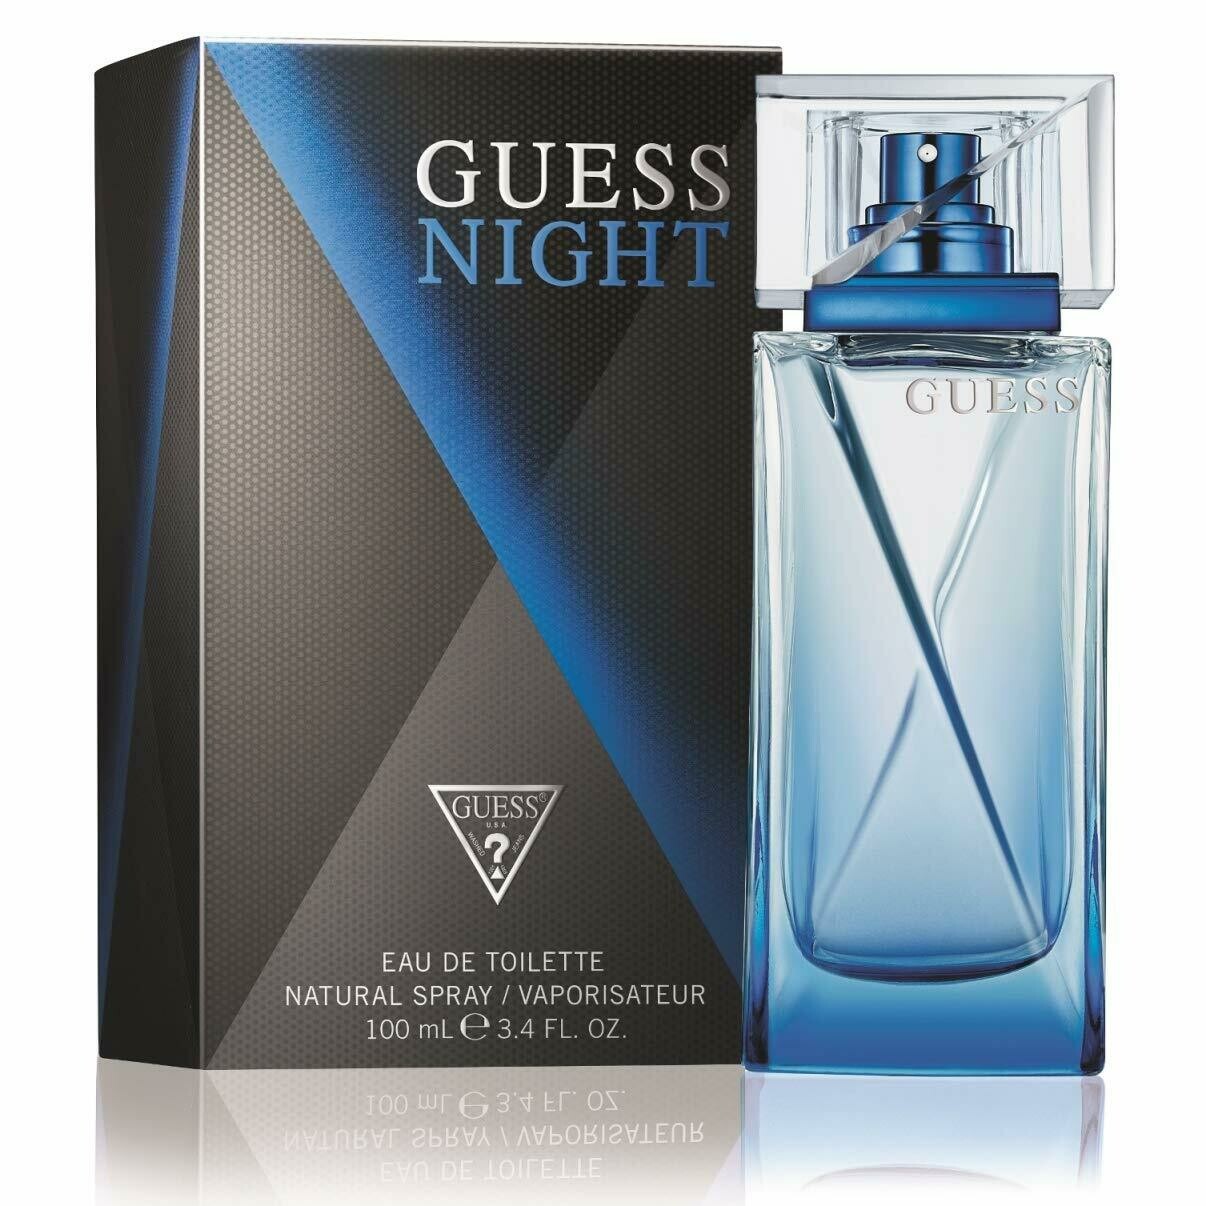 GUESS NIGHT EDT SP 100ML